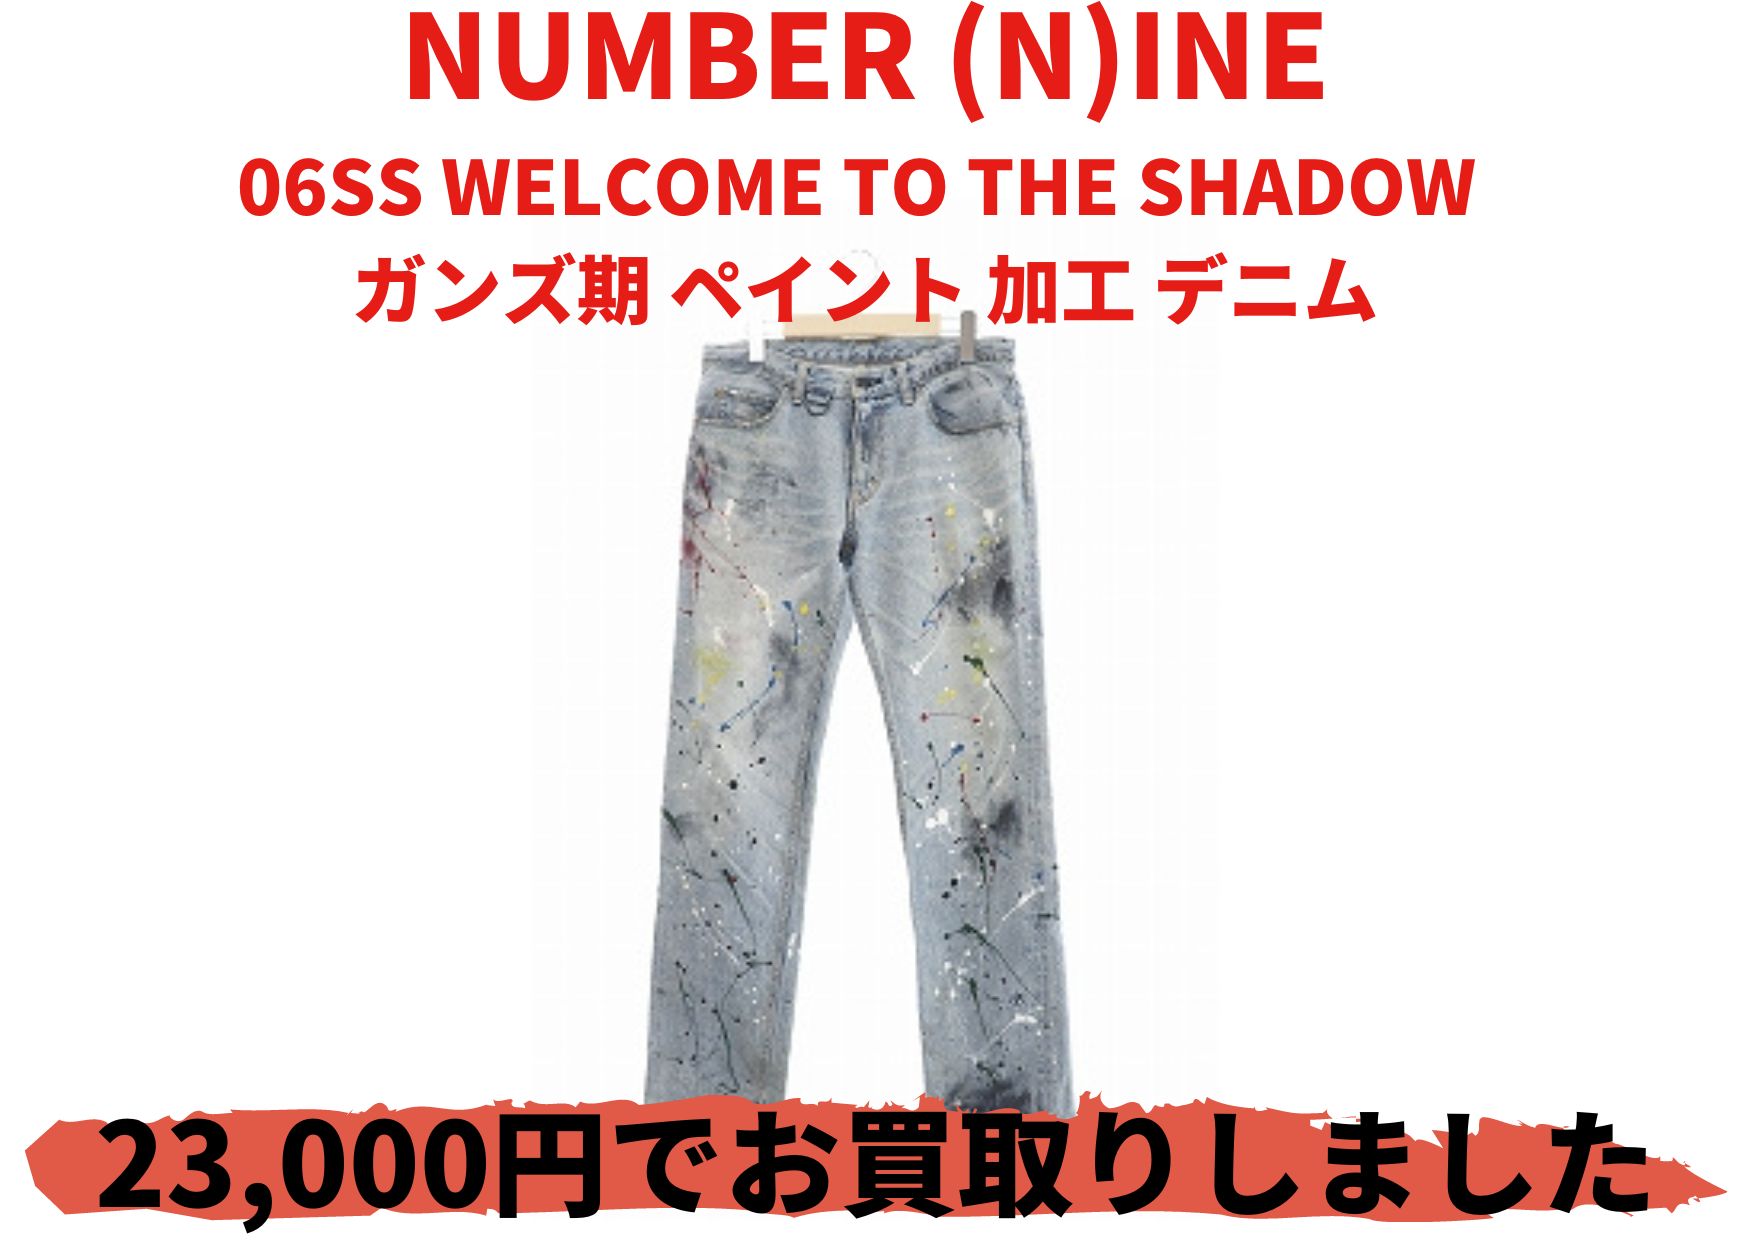 NUMBER (N)INE 06SS WELCOME TO THE SHADOW  ガンズ期 ペイント 加工 デニム